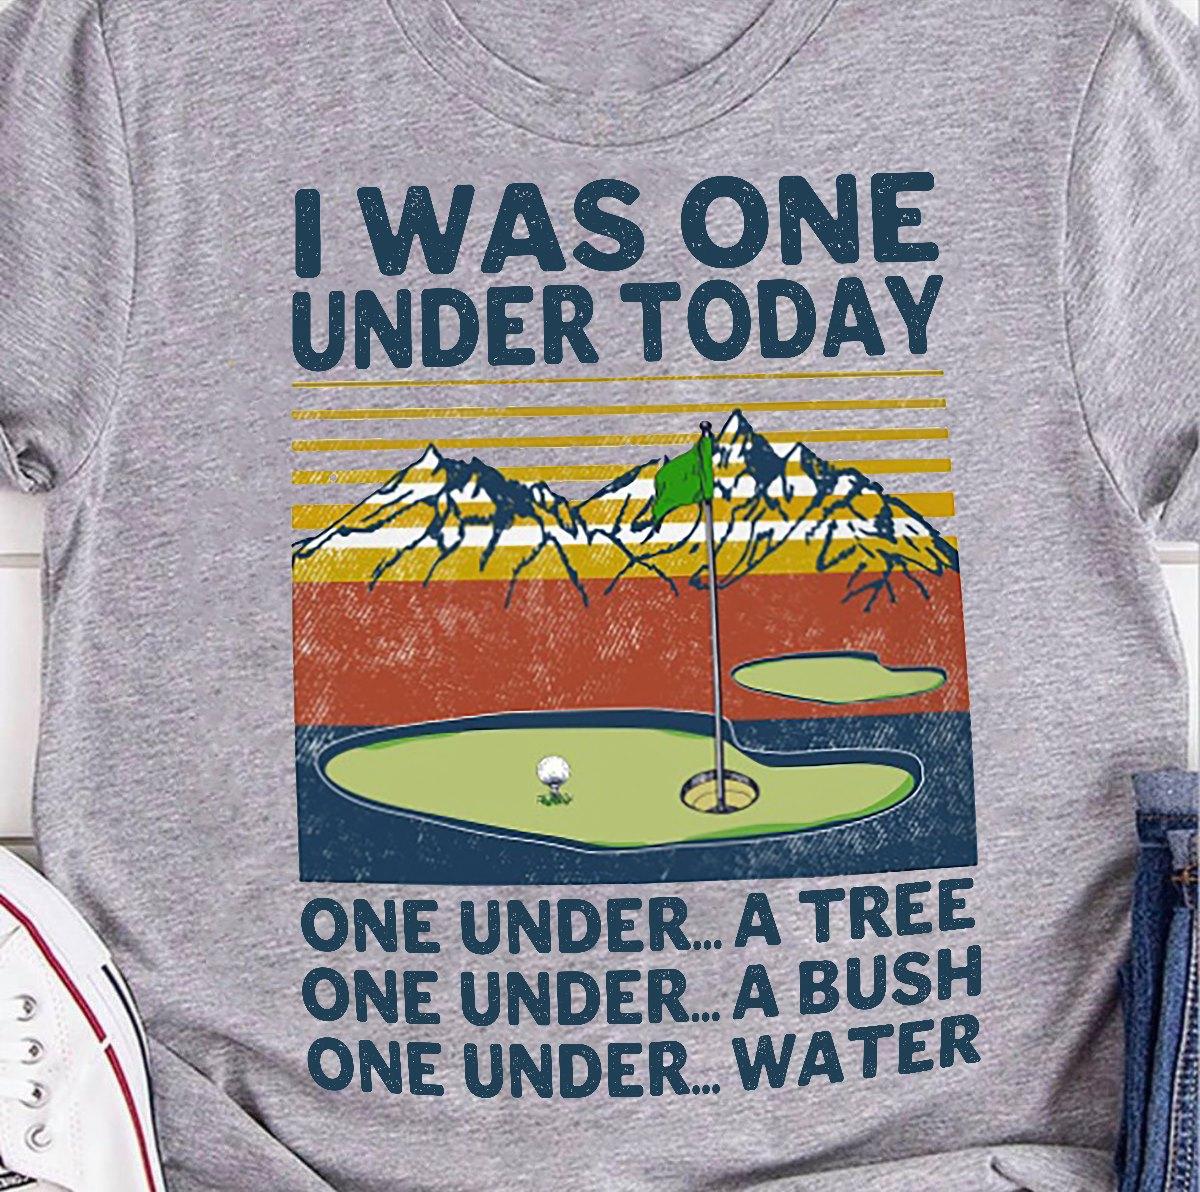 Golf Course, Golf Player - I was one under today one under a tree one under a bush one under water